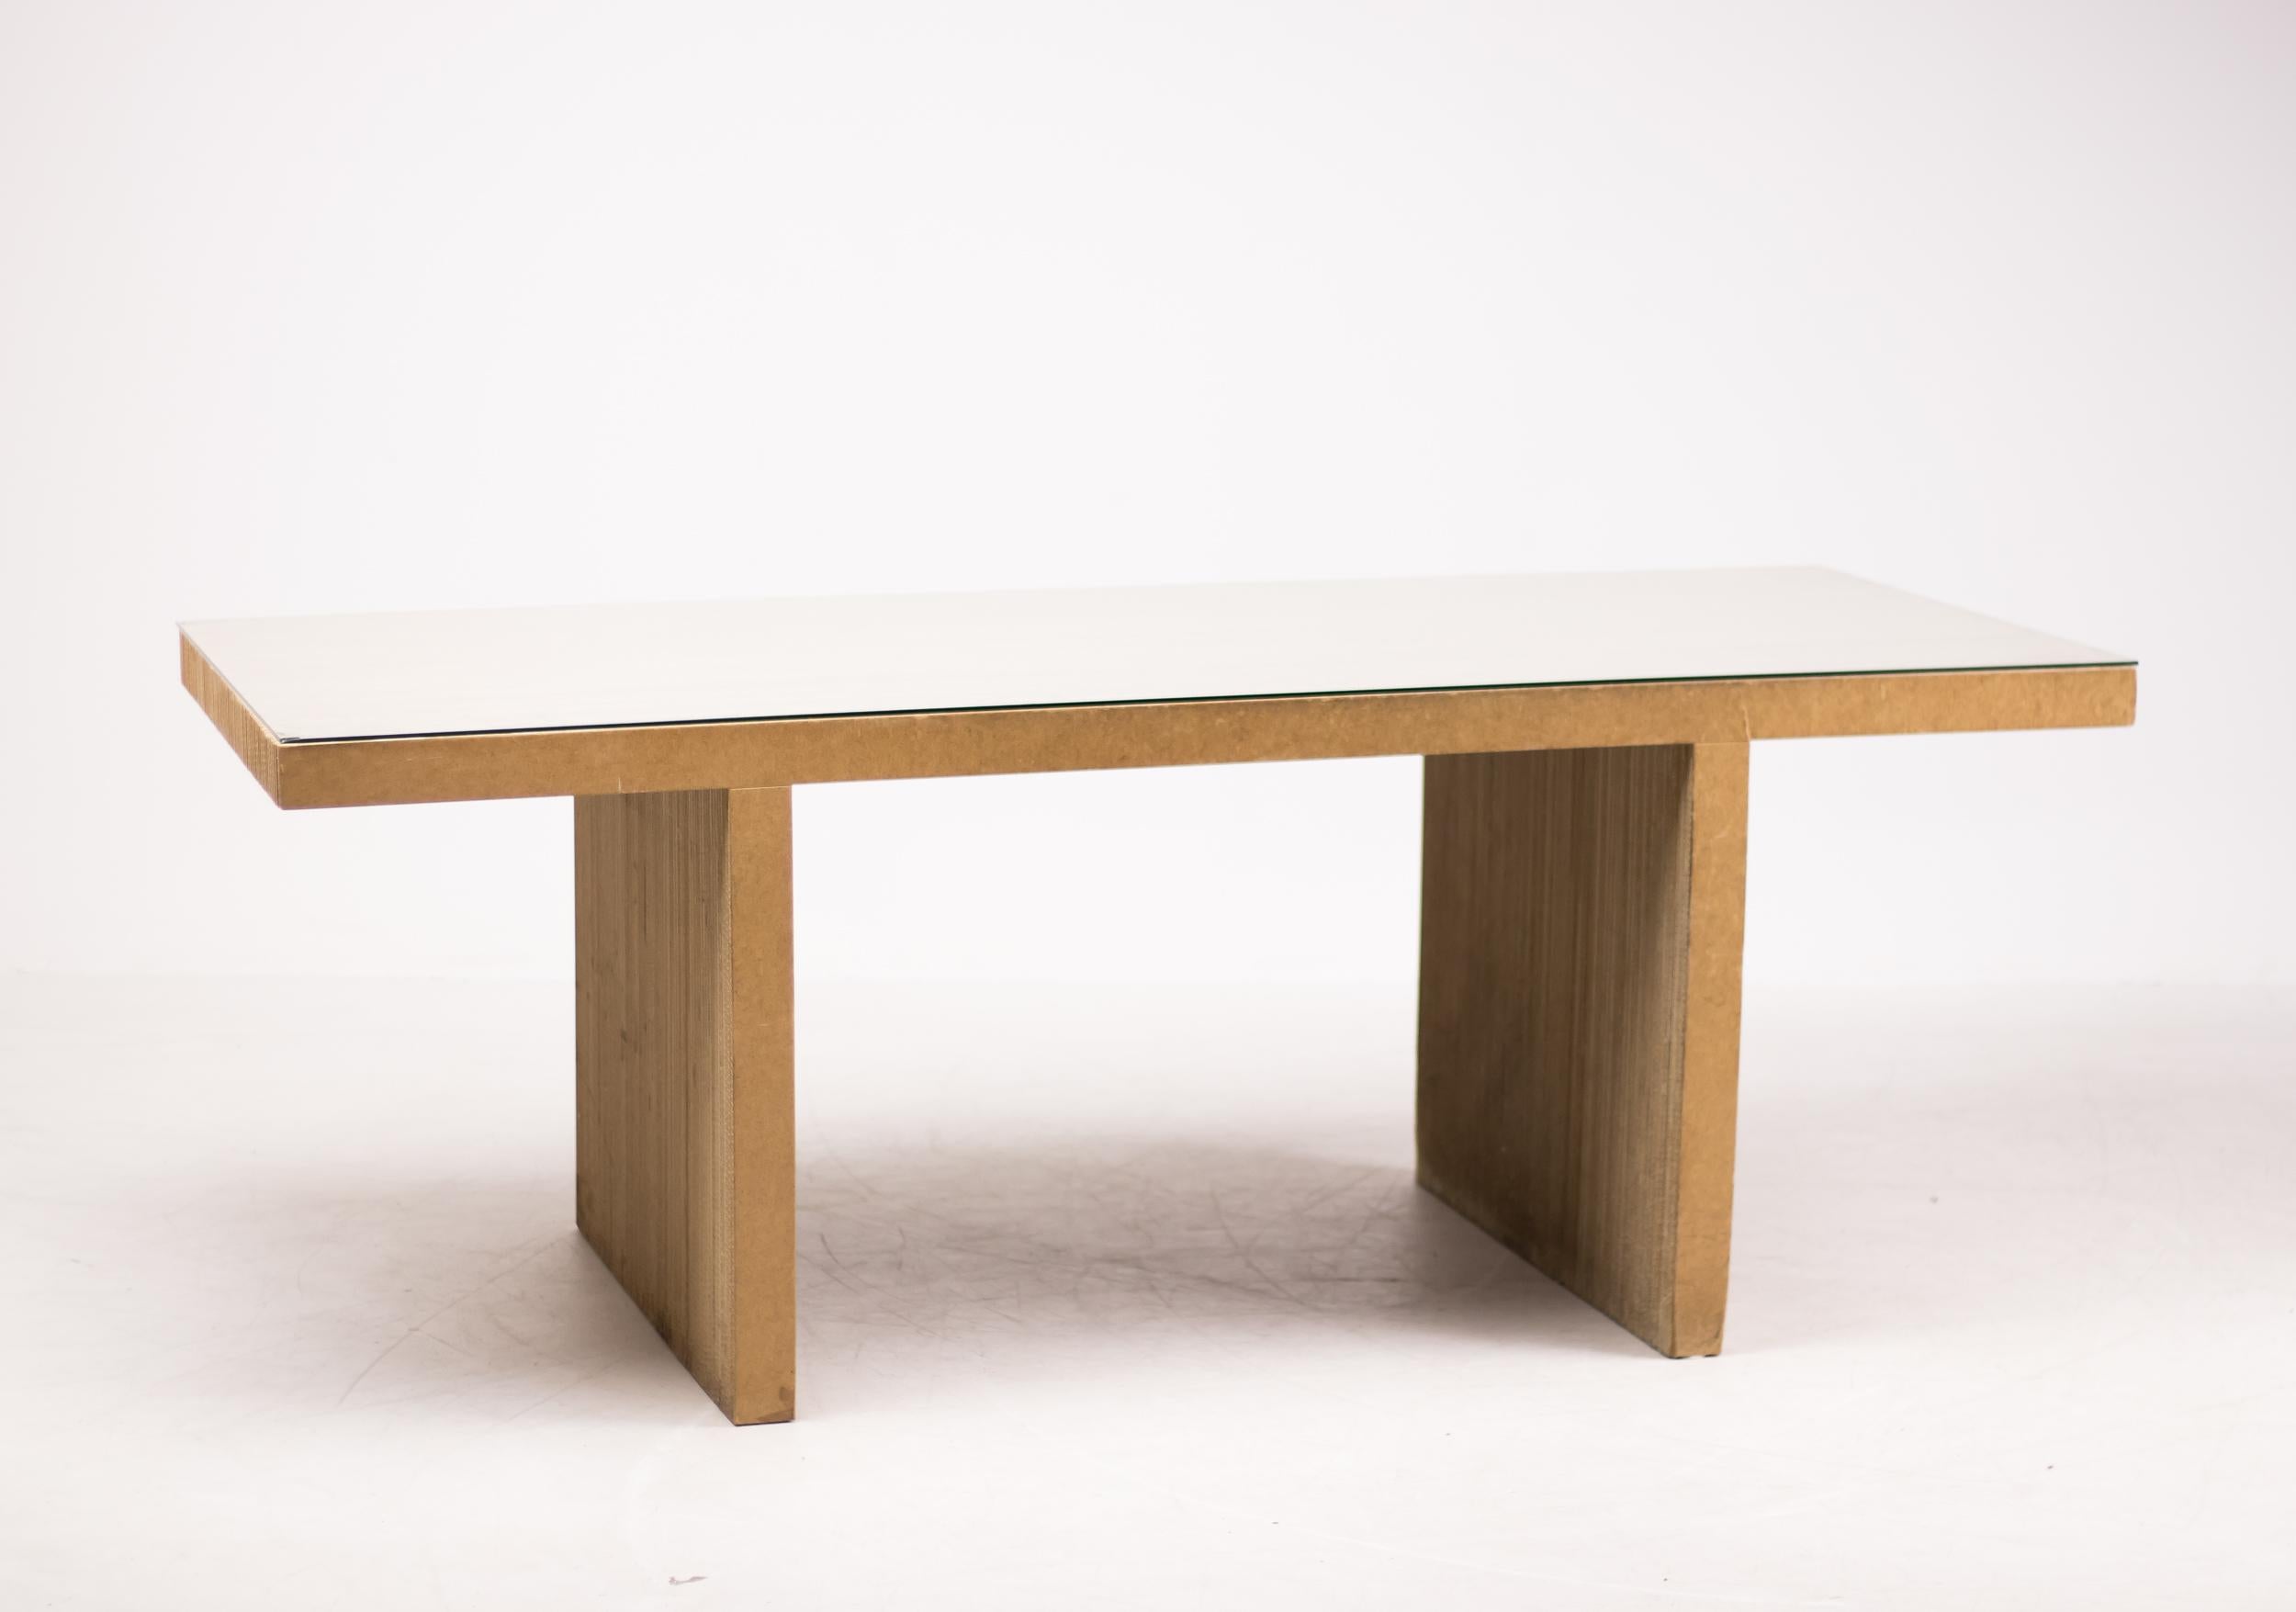 Masonite Easy Edges Table by Frank Gehry